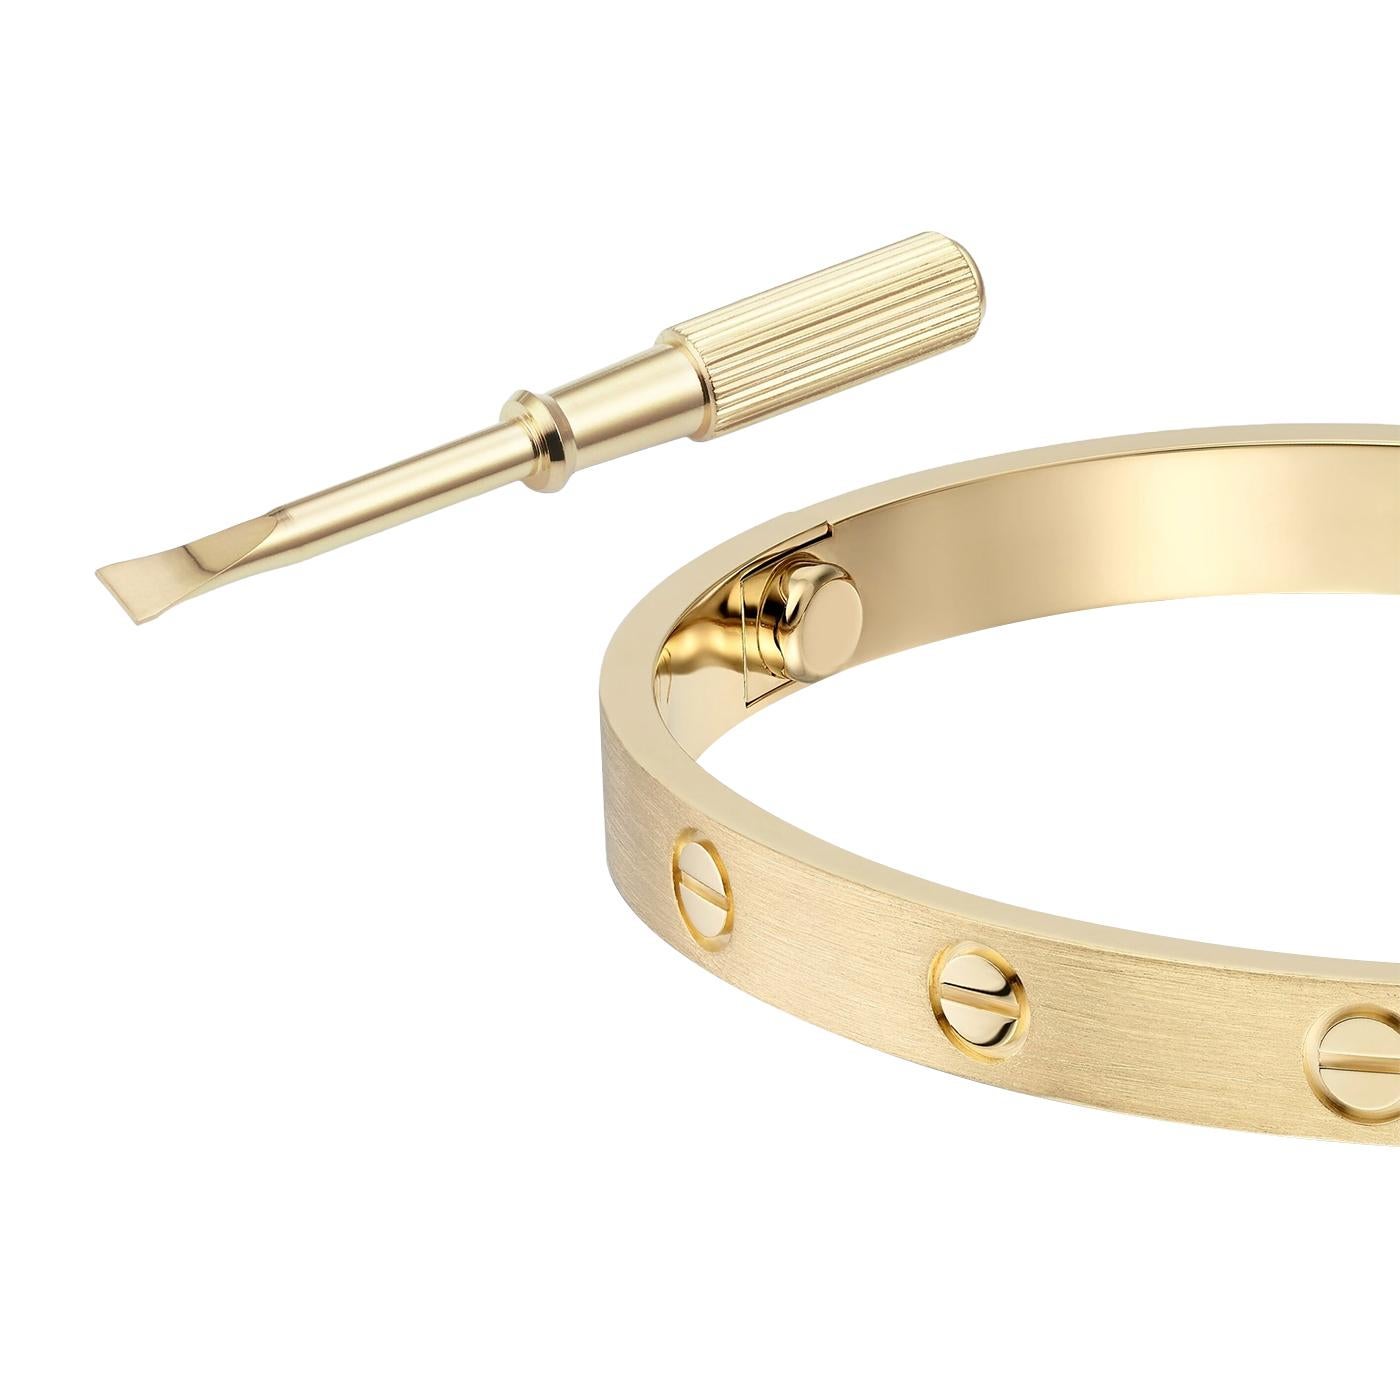 Cartier Love Bracelet 18K Yellow Gold Size 15 Brushed Finish with Screwdriver In Excellent Condition For Sale In Aventura, FL